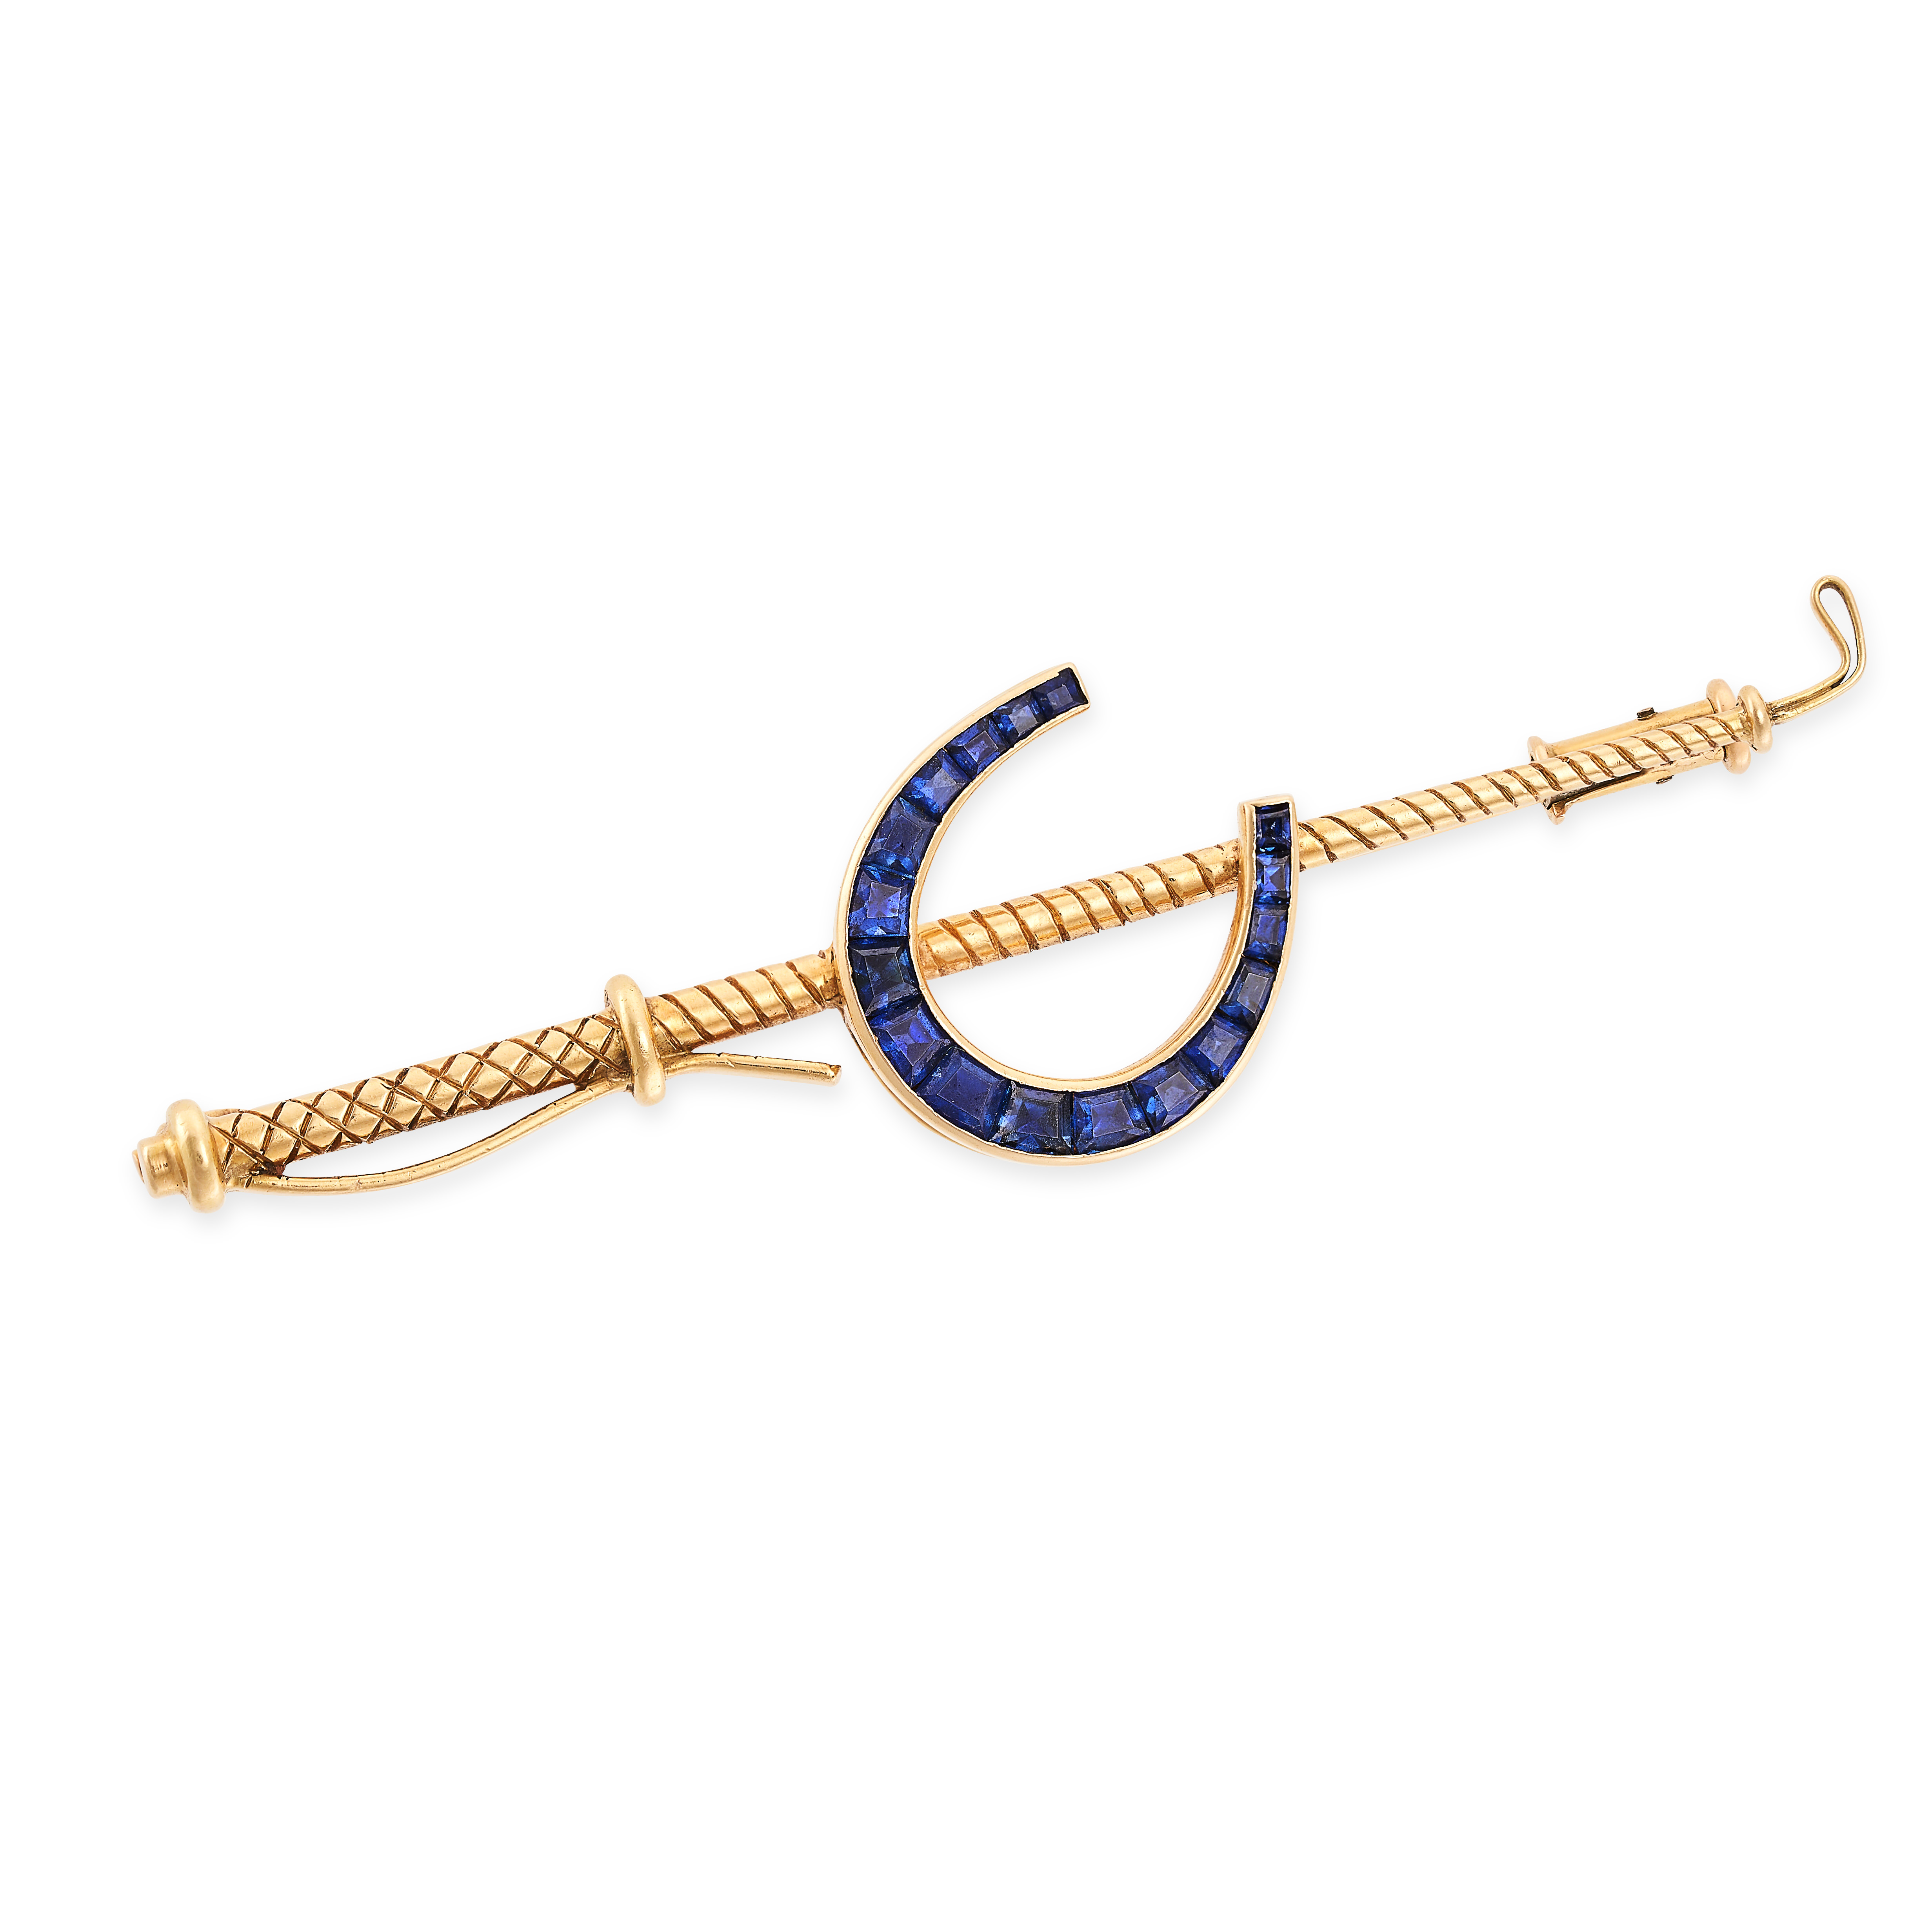 CARTIER, A SAPPHIRE STOCK PIN BROOCH in 18ct yellow gold, designed as a riding crop and horse shoe